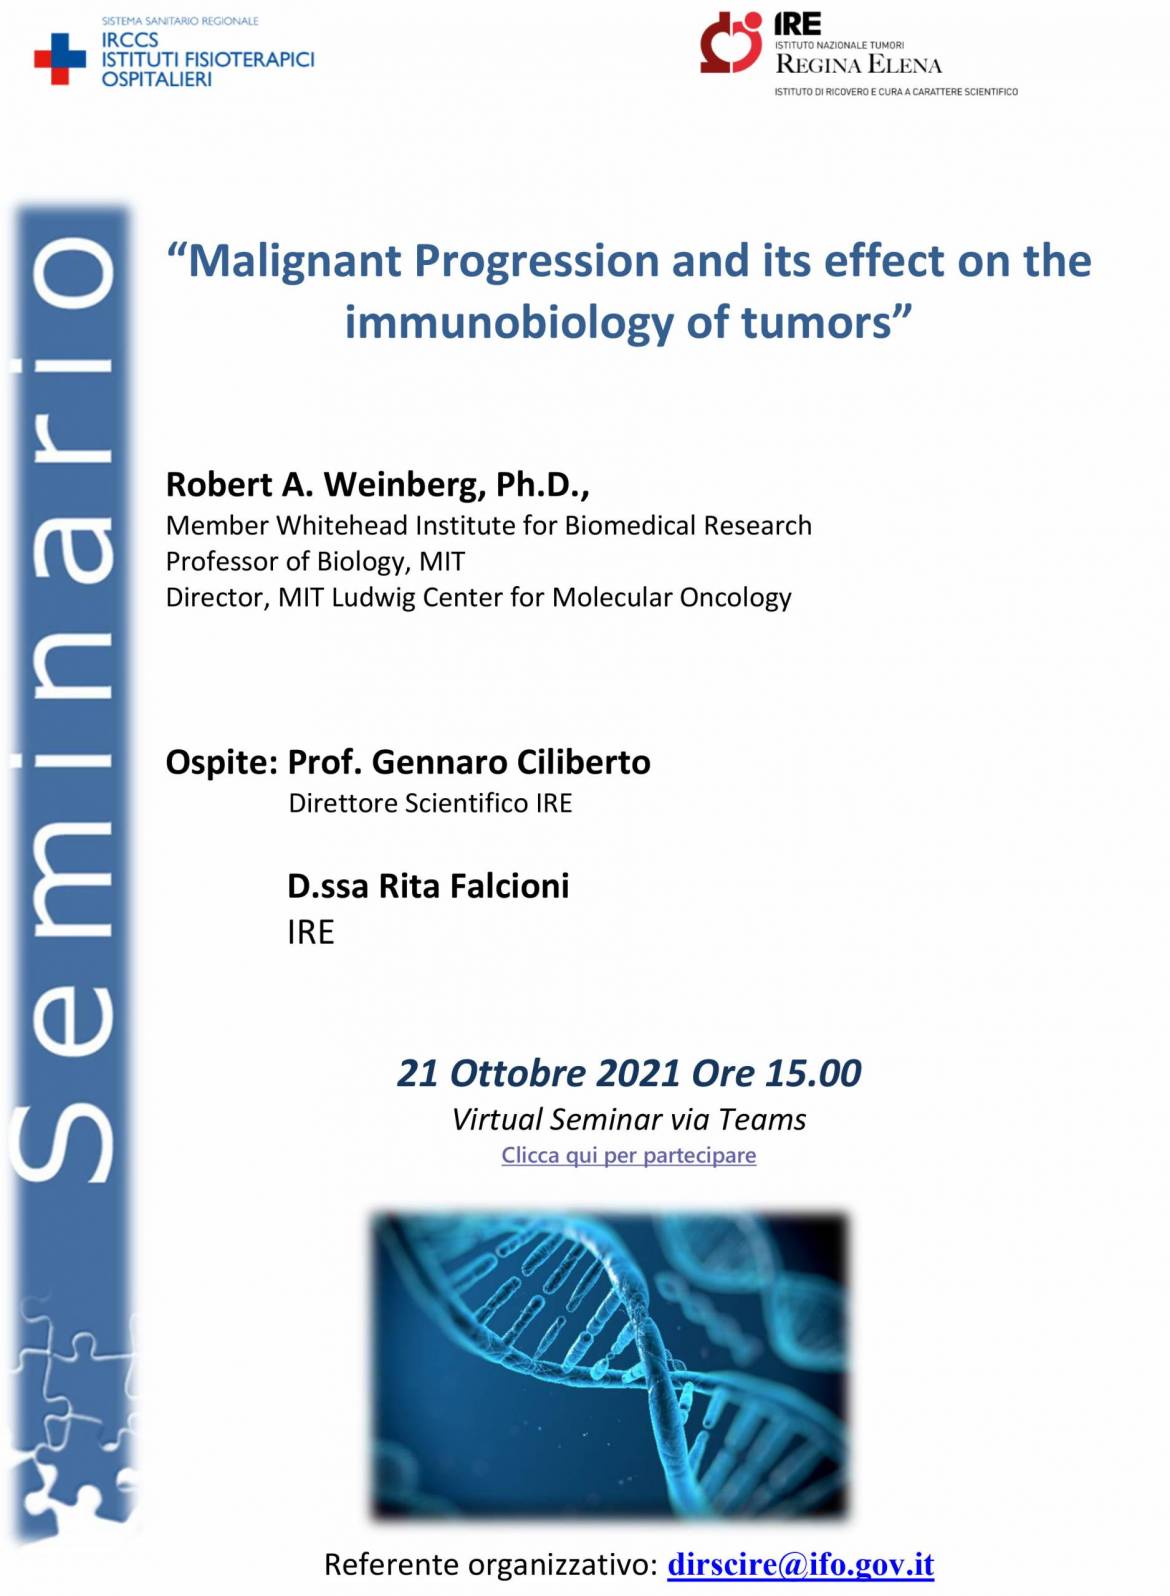 Malignant progression and its effect on the immunobiology of tumors